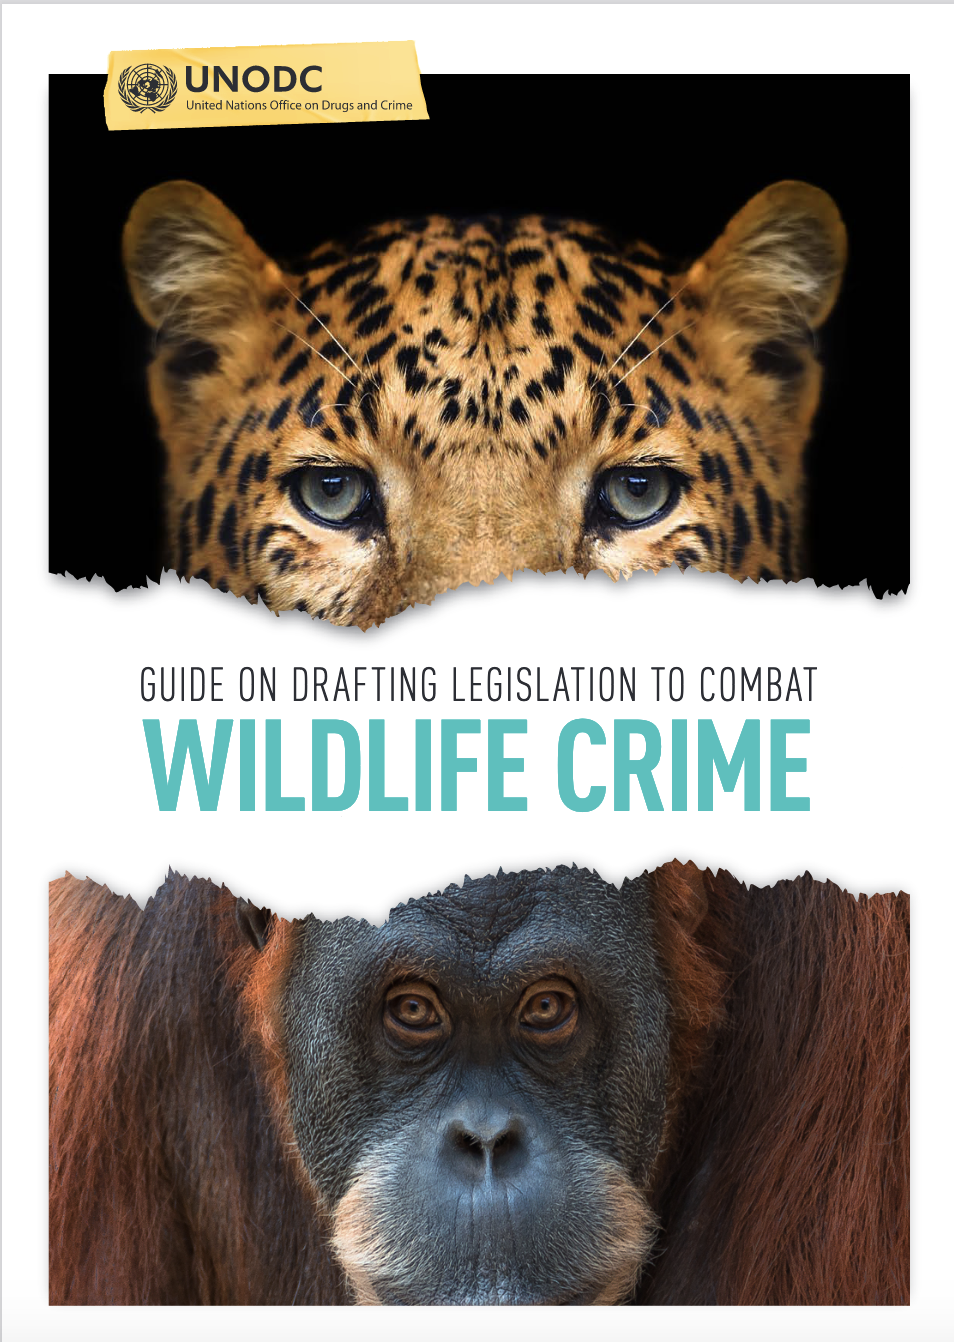 Cover page of the UNODC publication “Guide on drafting legislation to combat wildlife crime”